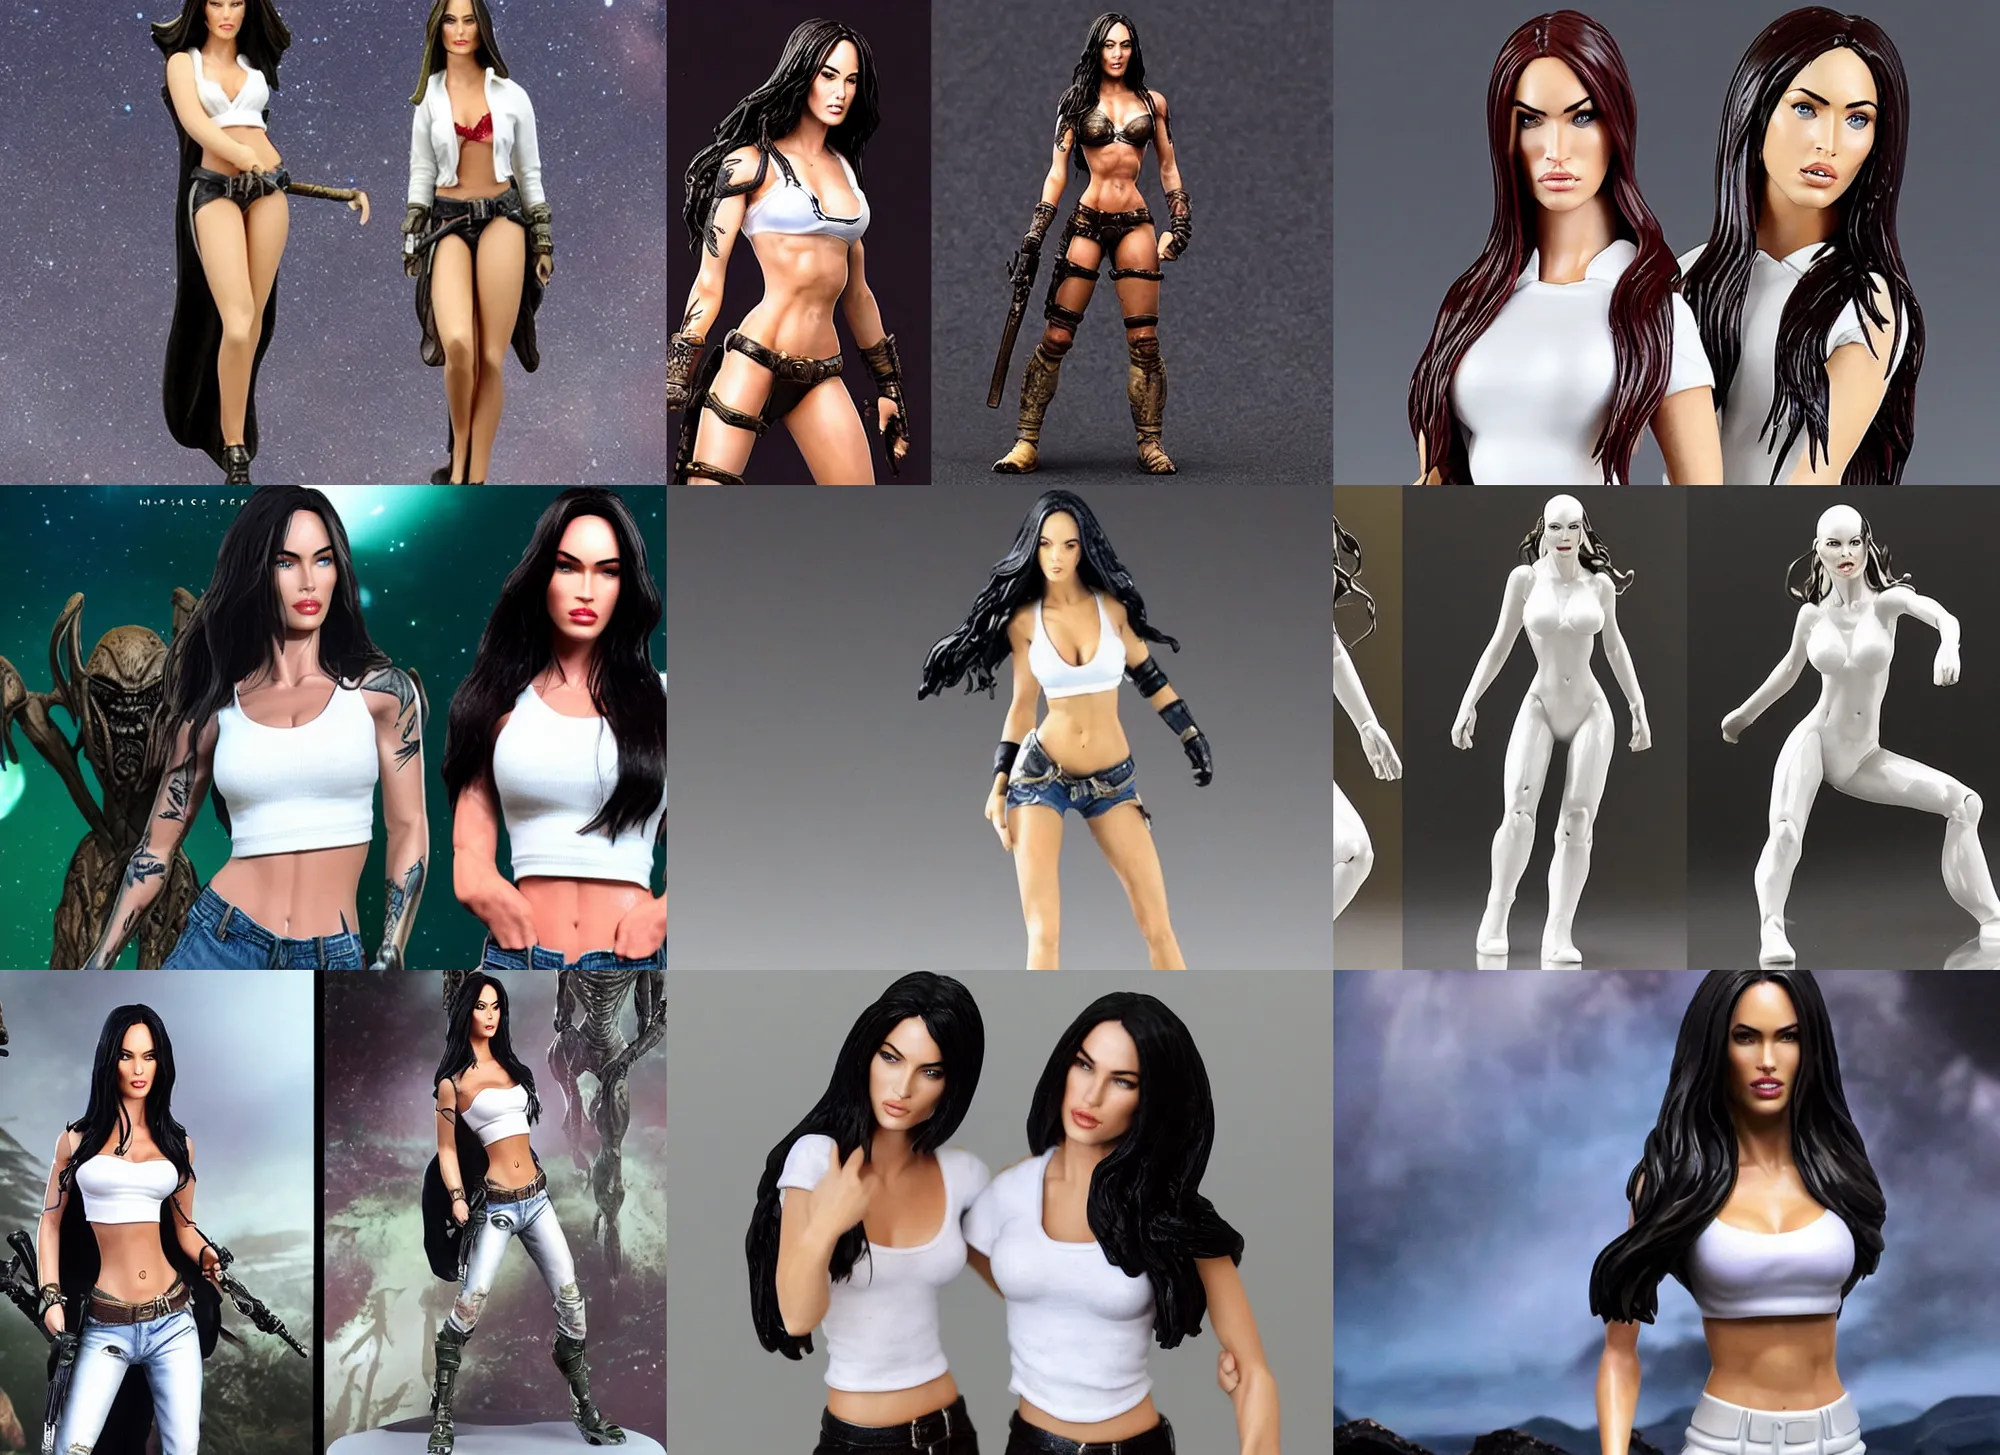 Prompt: Image on the store website, eBay, Full body, 80mm resin detailed miniature of Megan Fox in white shirts stand next to an Alien warrior